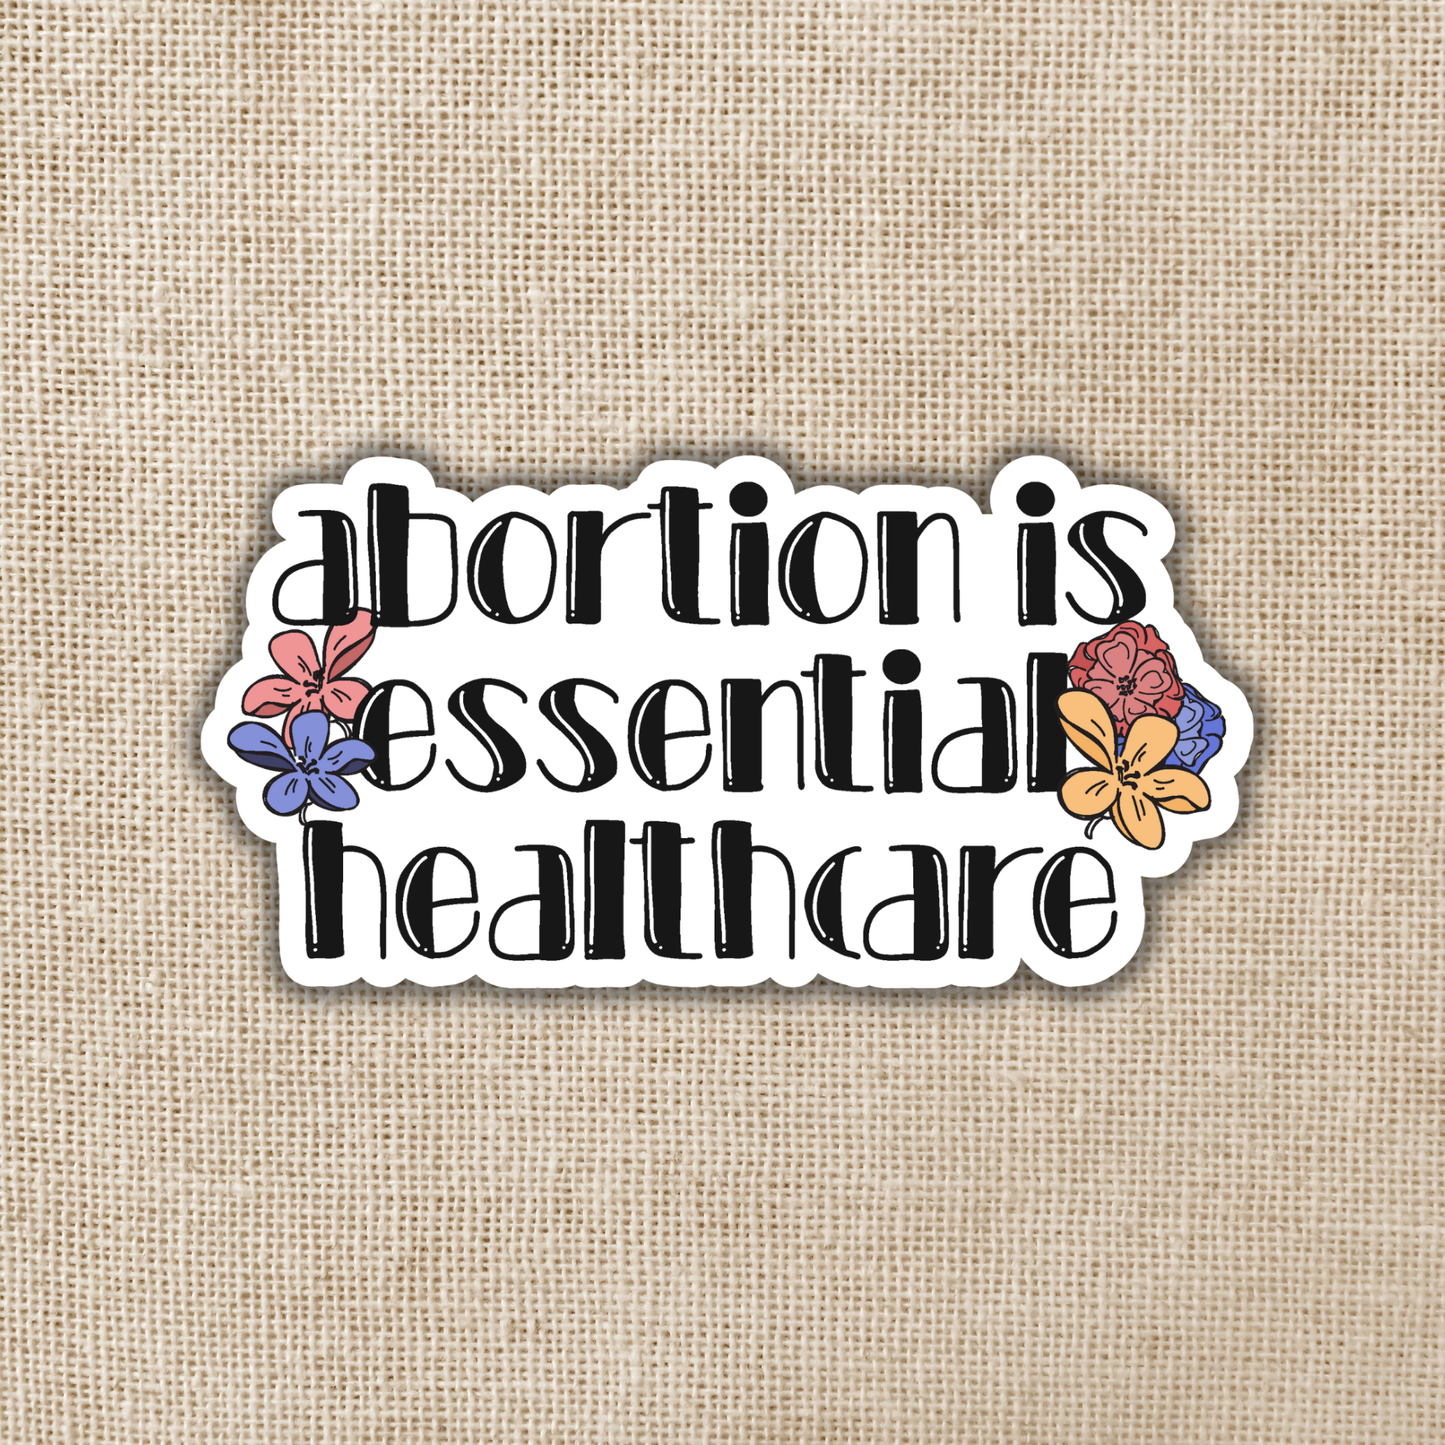 Sticker-ProChoice-02: Abortion is Essential Healthcare